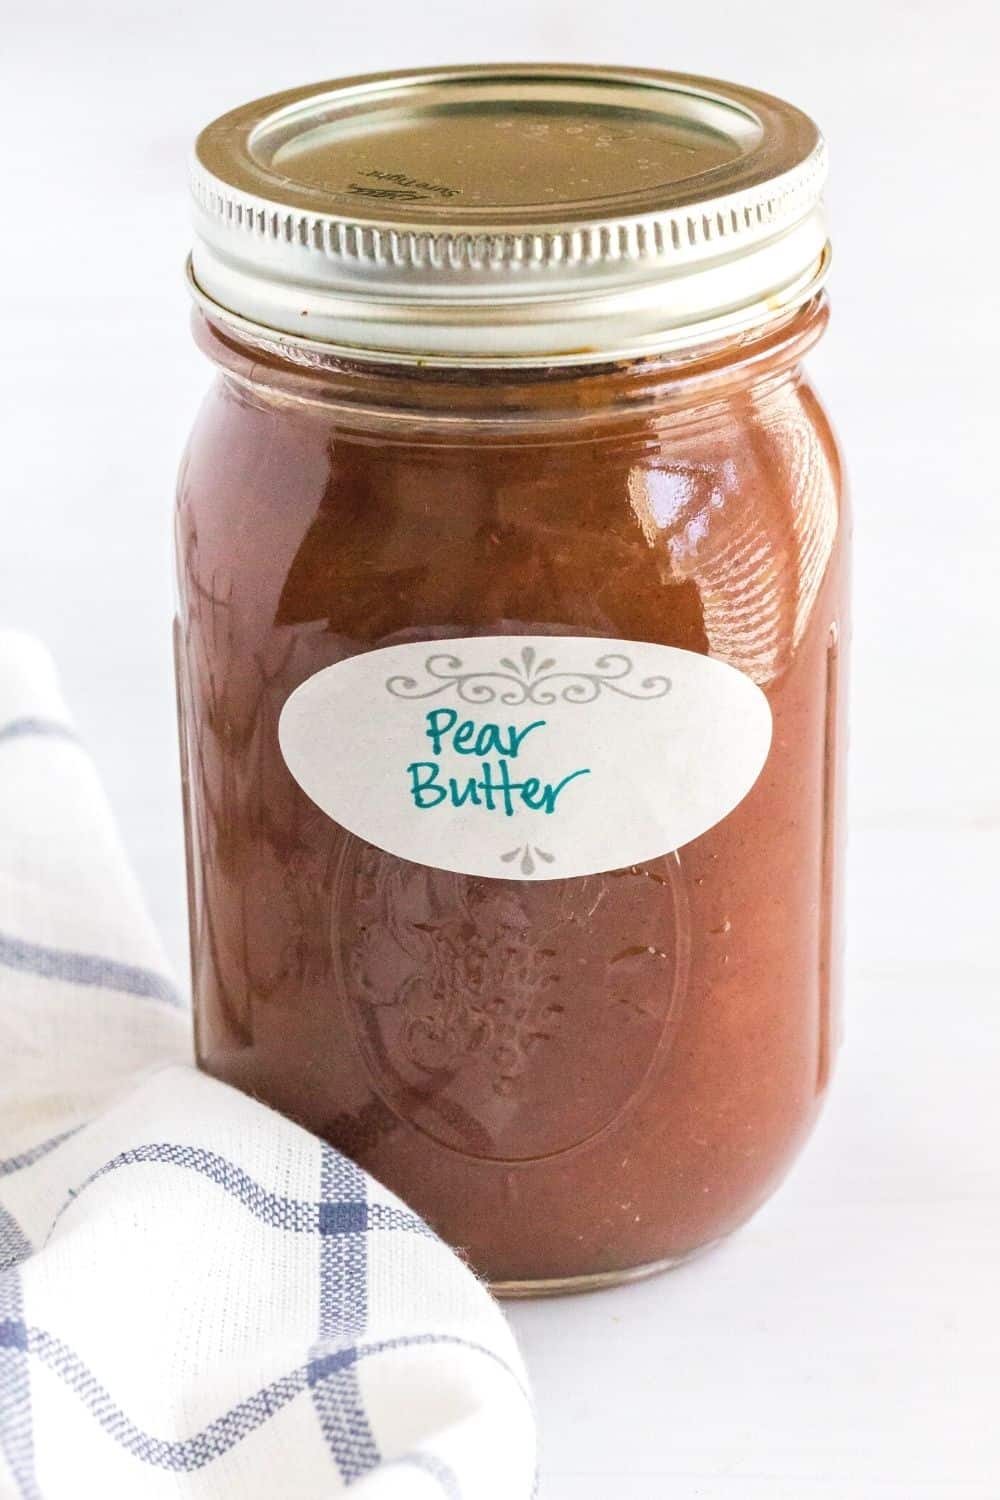 a jar of pear butter with a dissolveable label on it that reads "pear butter"